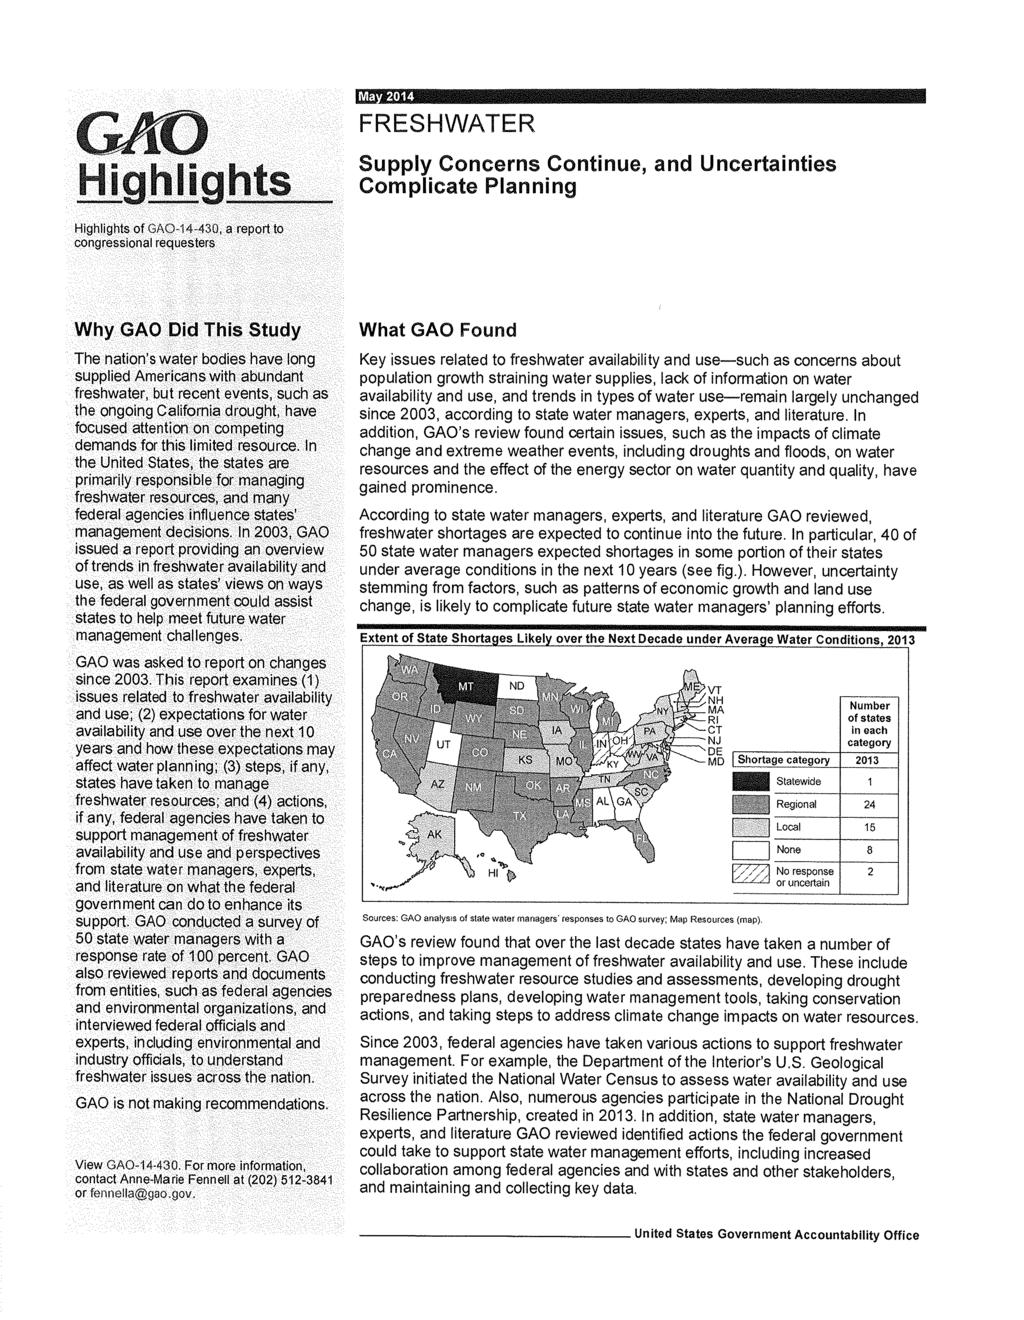 ghlights Ma 201 FRESHWATER Supply Concerns Continue, and Uncertainties Complicate Planning Highlights of GAO-14-430, a report to congressional requesters Why GAO Did This Study The nation's water